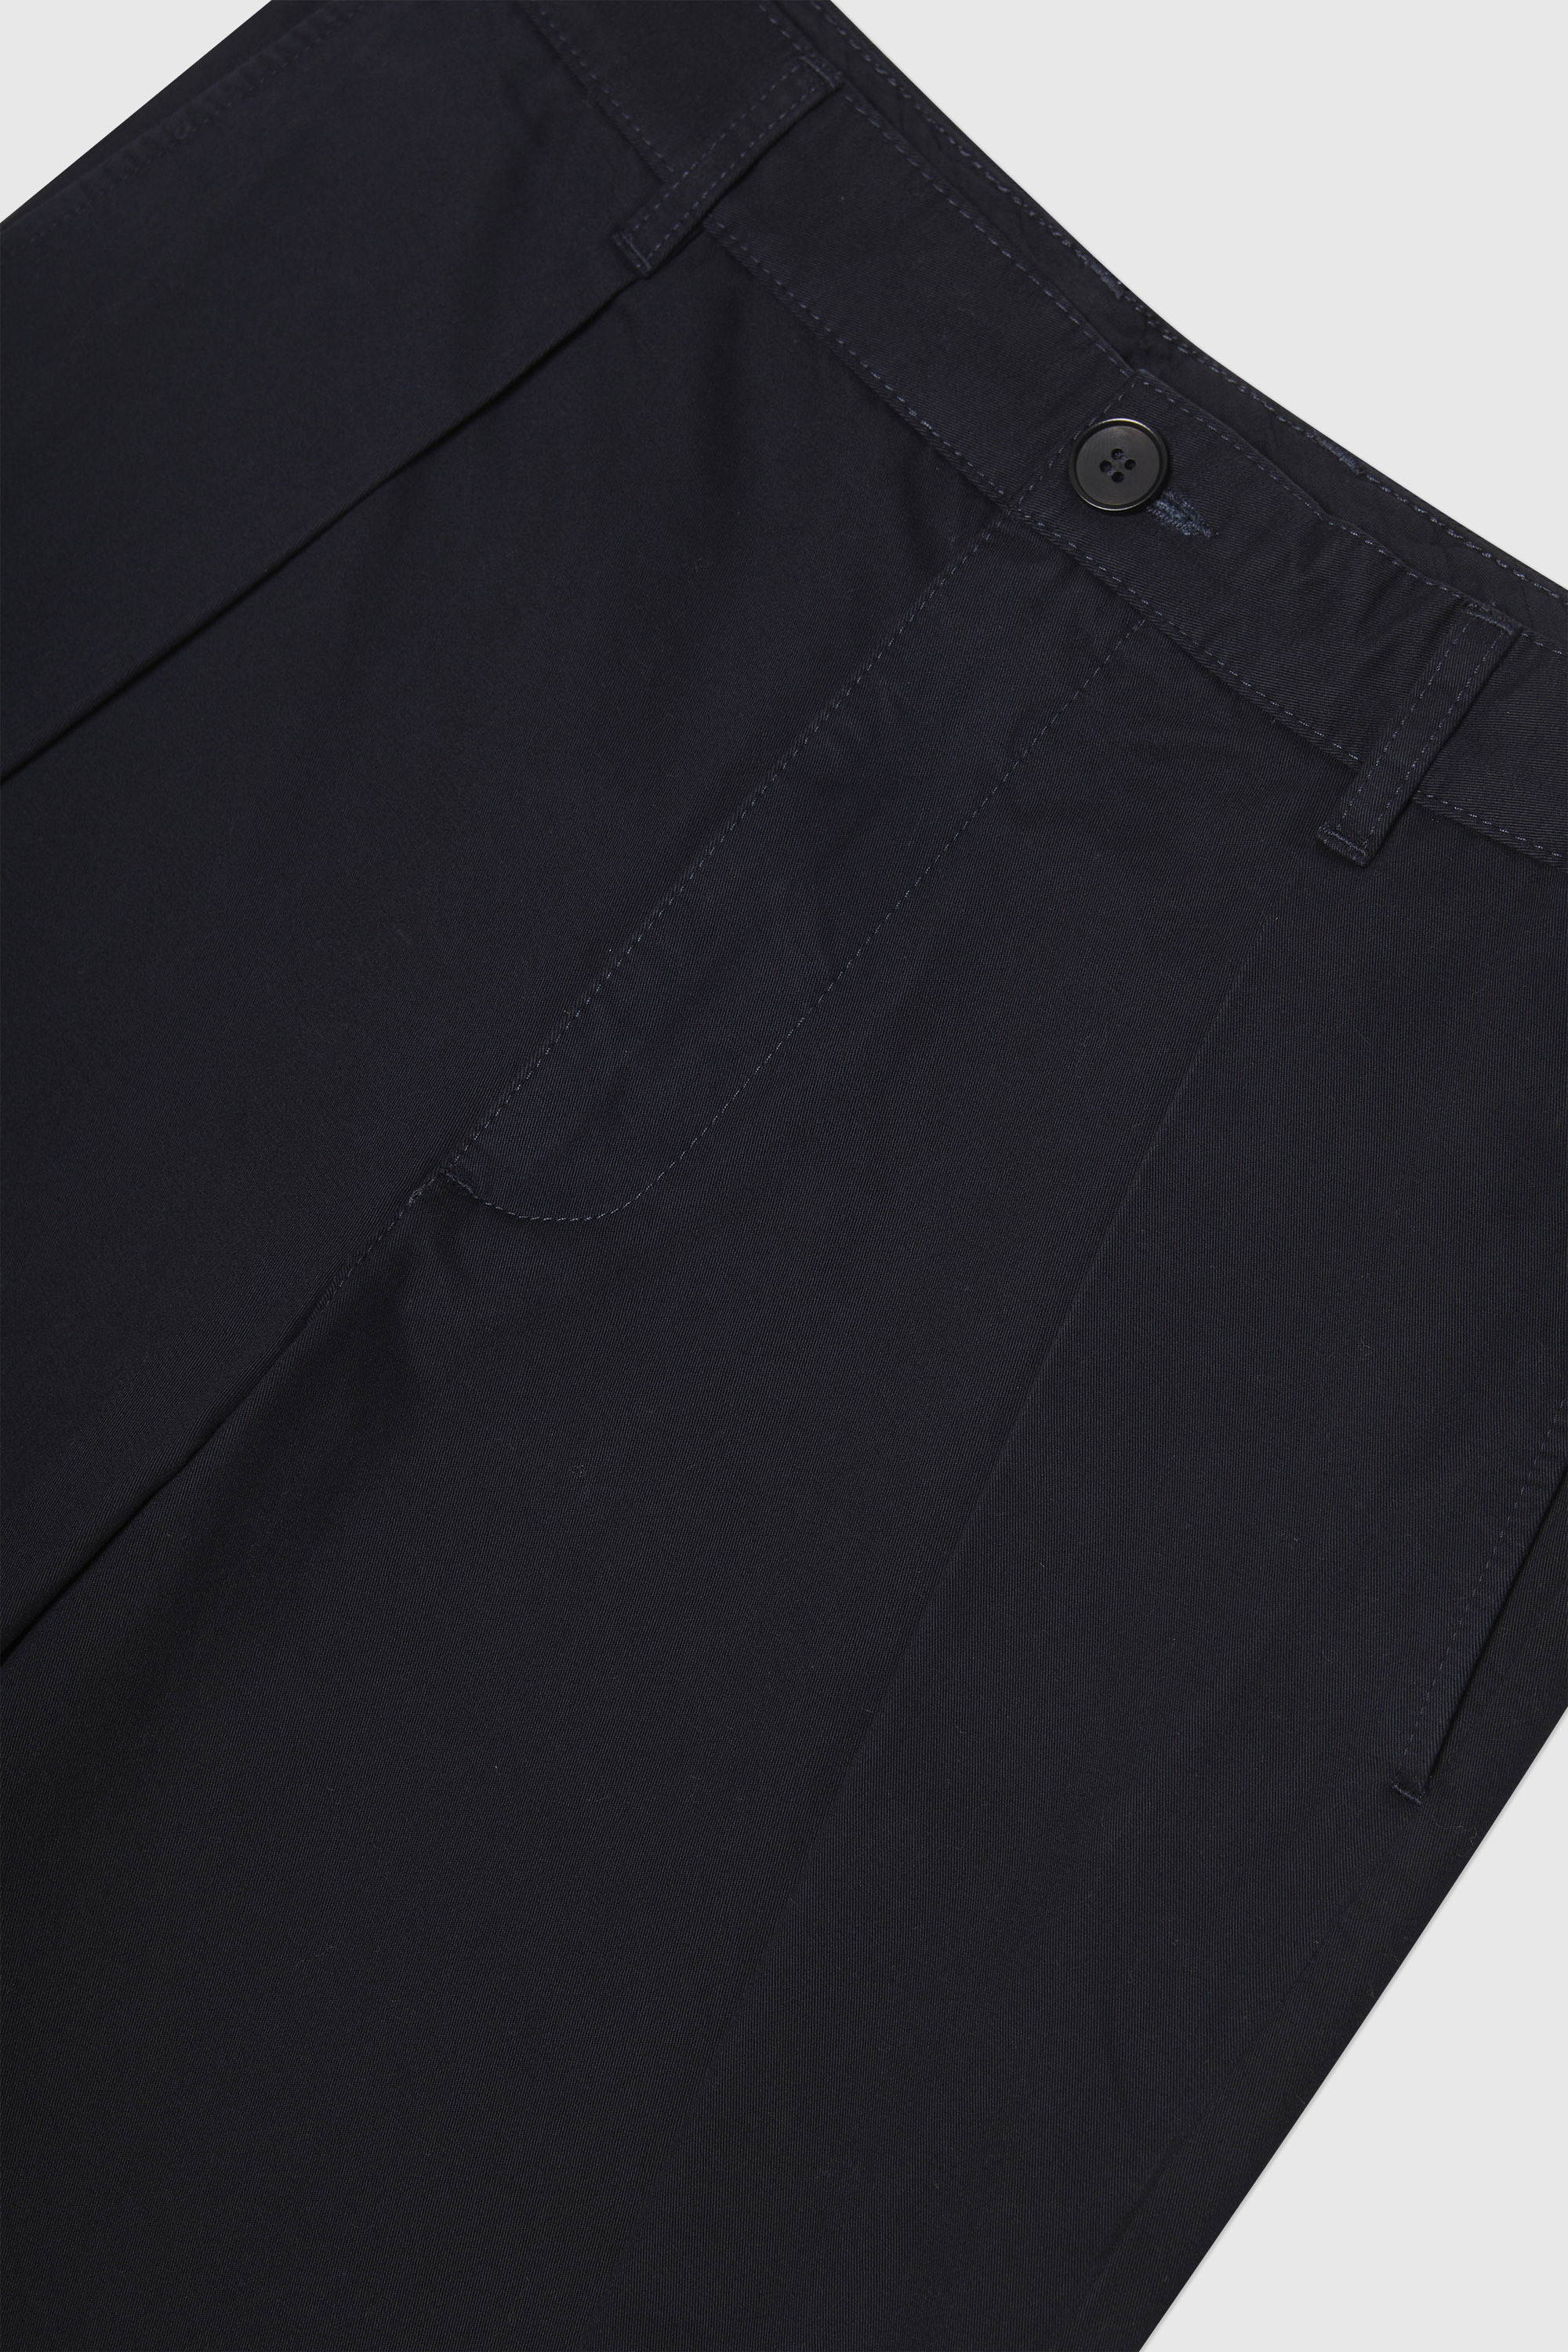 Wood Wood Fraser Pleated Chino Navy | WoodWood.com